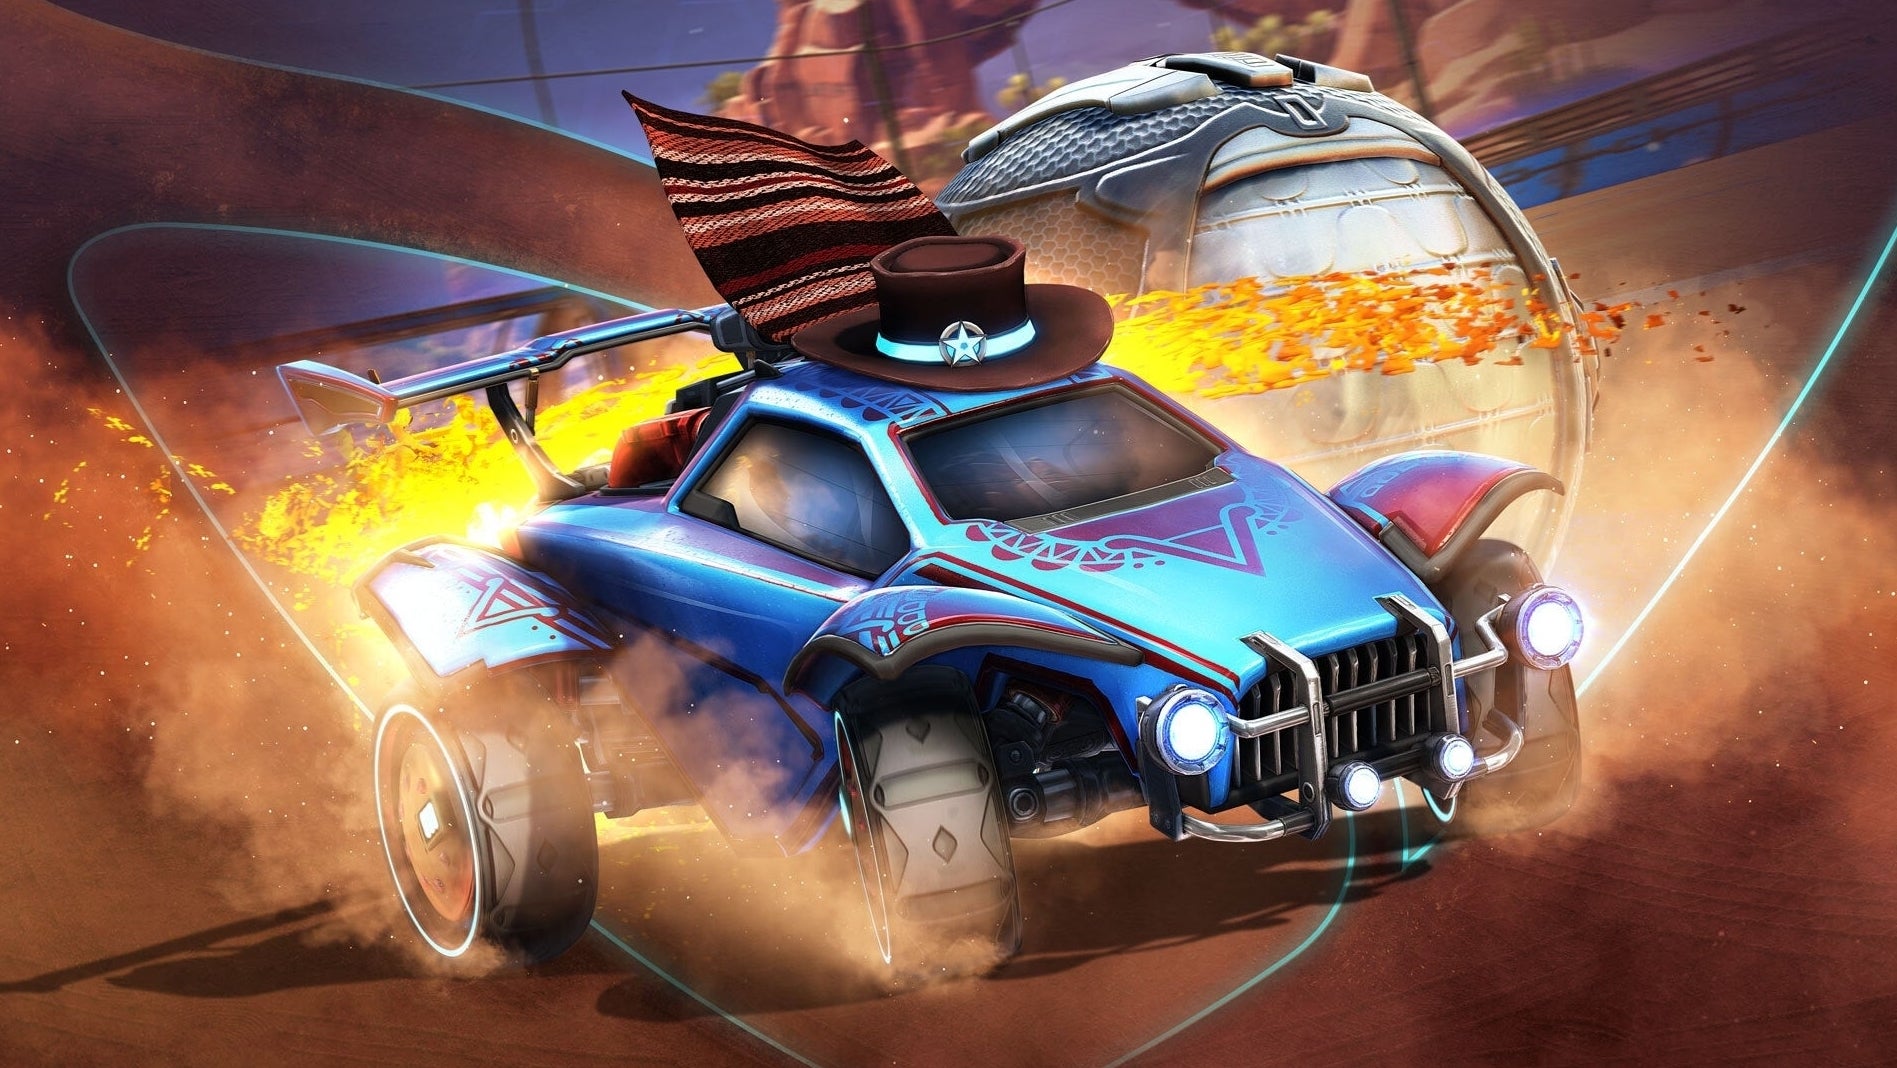 Image for Rocket League's Season 4 brings dusty new Deadeye Canyon arena and more this week